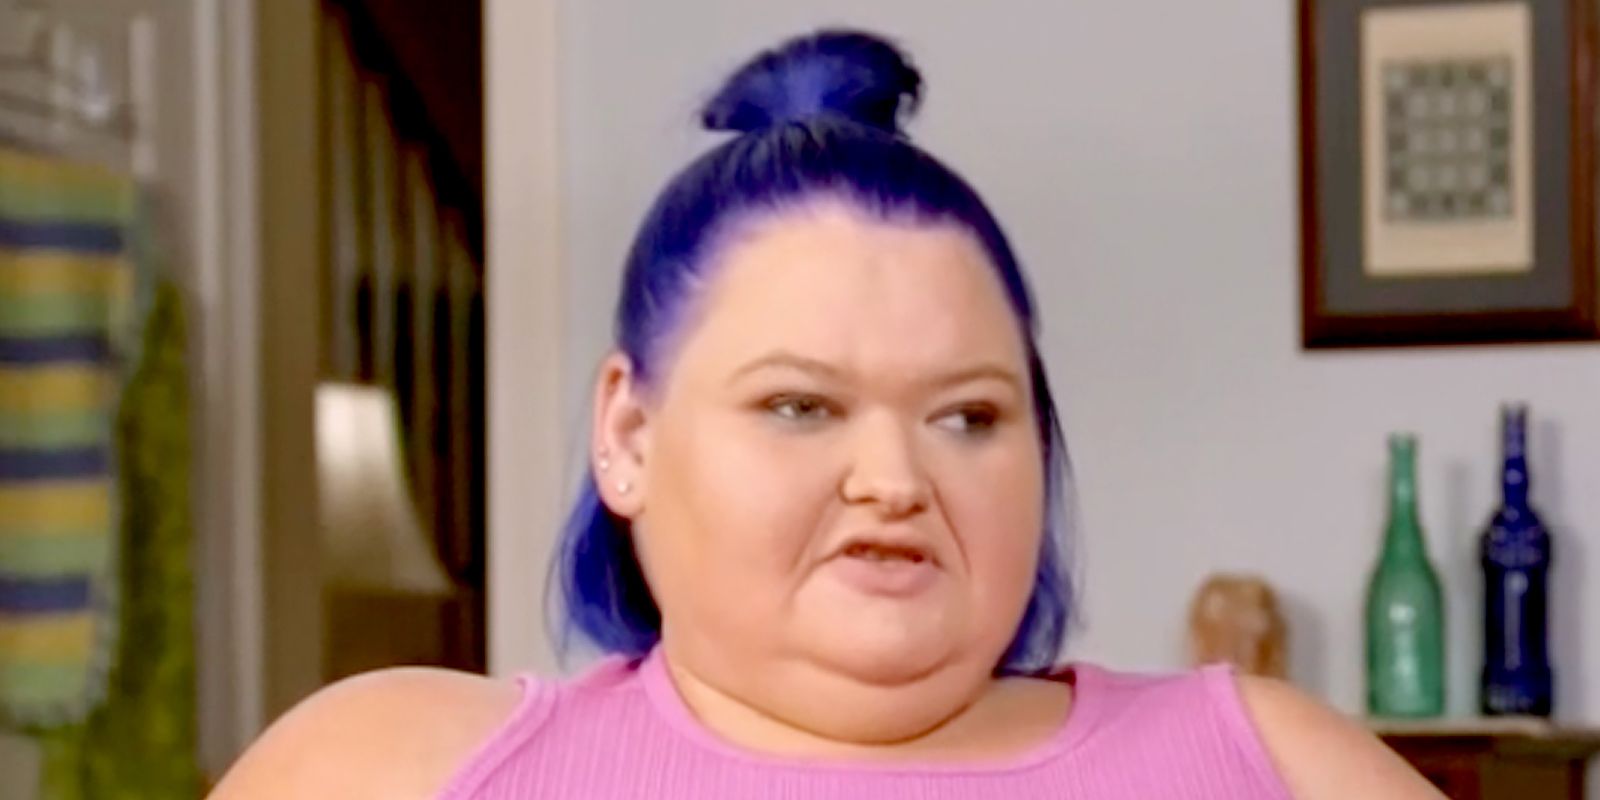 1000-Lb. Sisters' Amy Slaton is secretly dating Tony Rodgers and